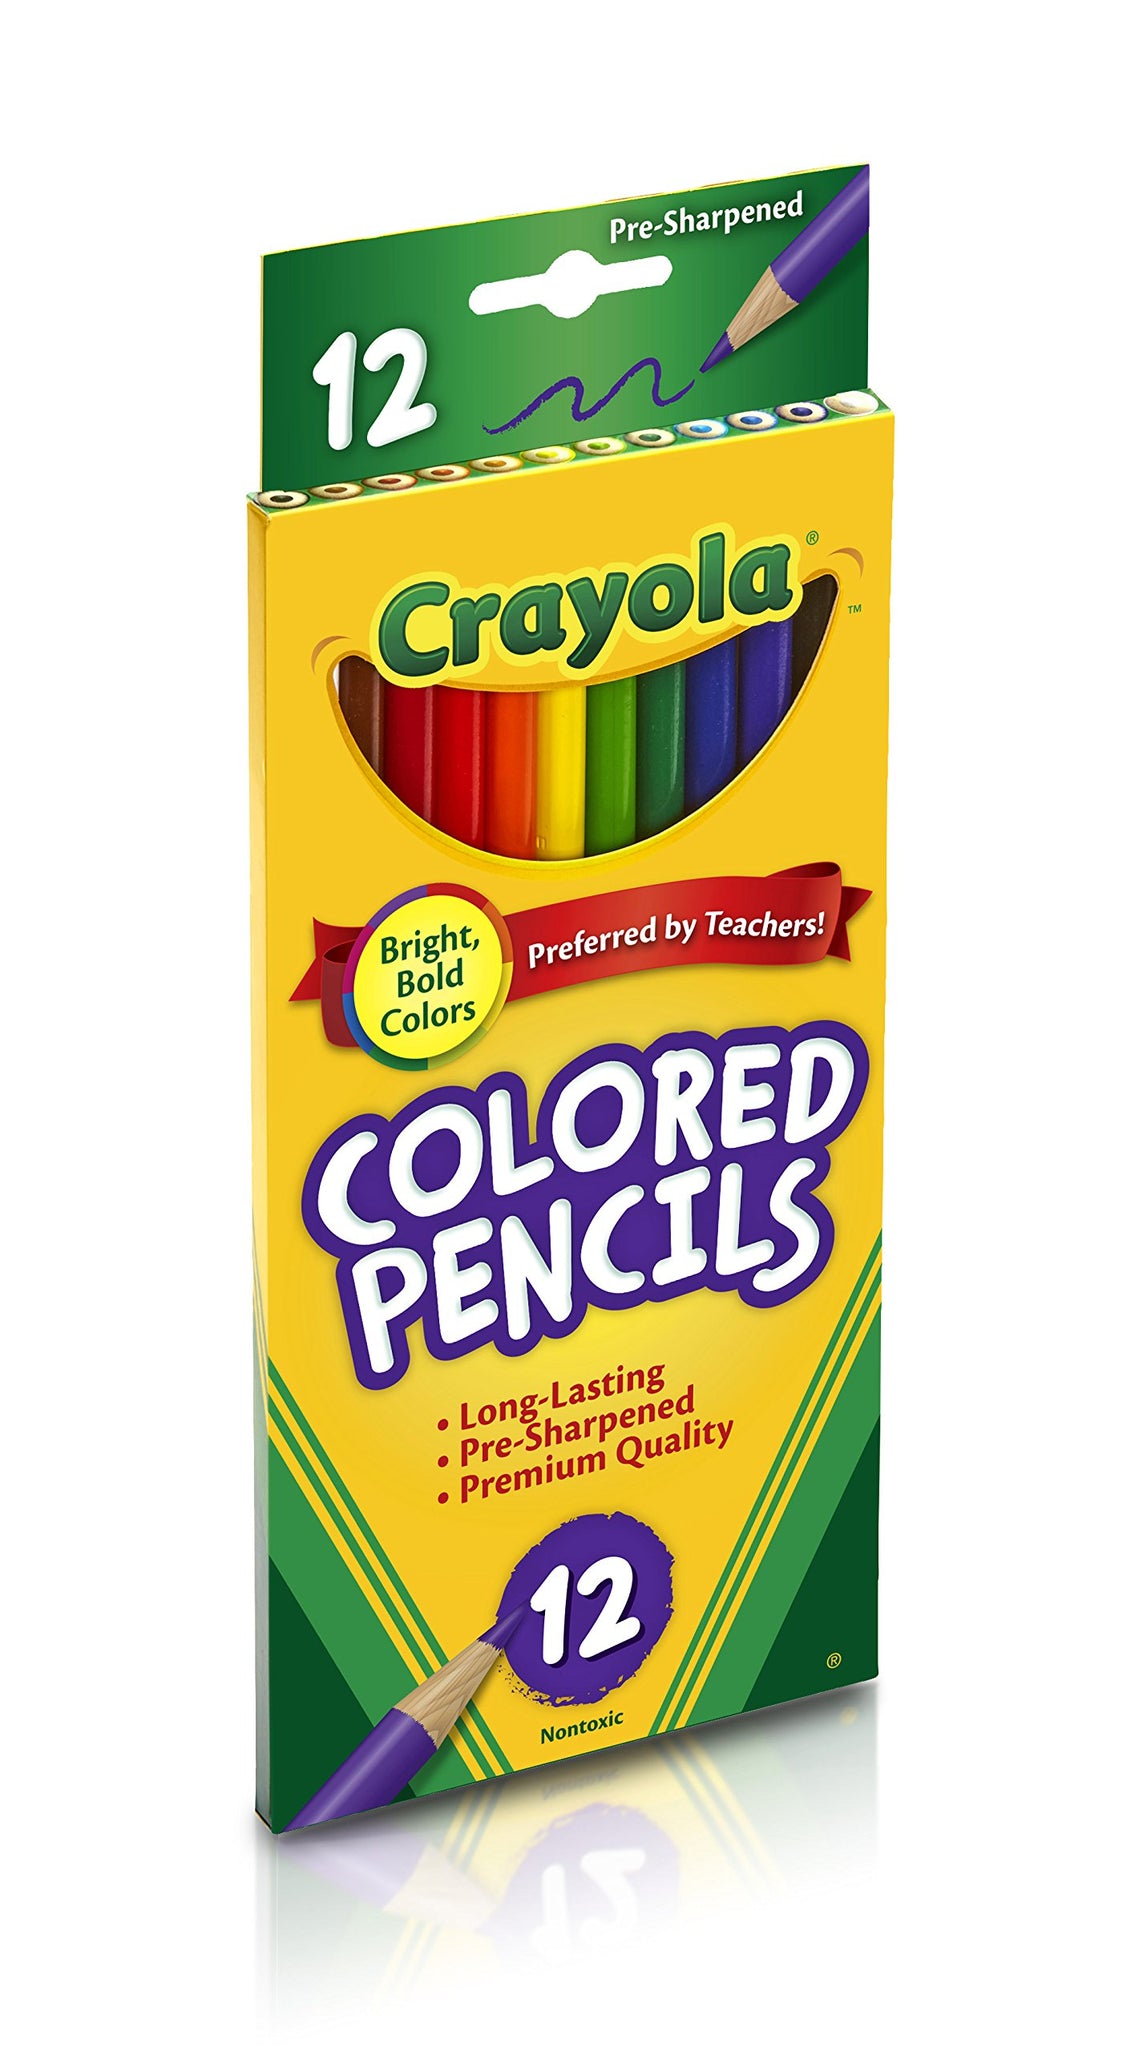 Crayola Back To School Supplies, Grades 3-5, Ages 7, 8, 9, 10, Contains 24 Crayola Crayons, 10 Washable Broad Line Markers, and 12 Colored Pencils